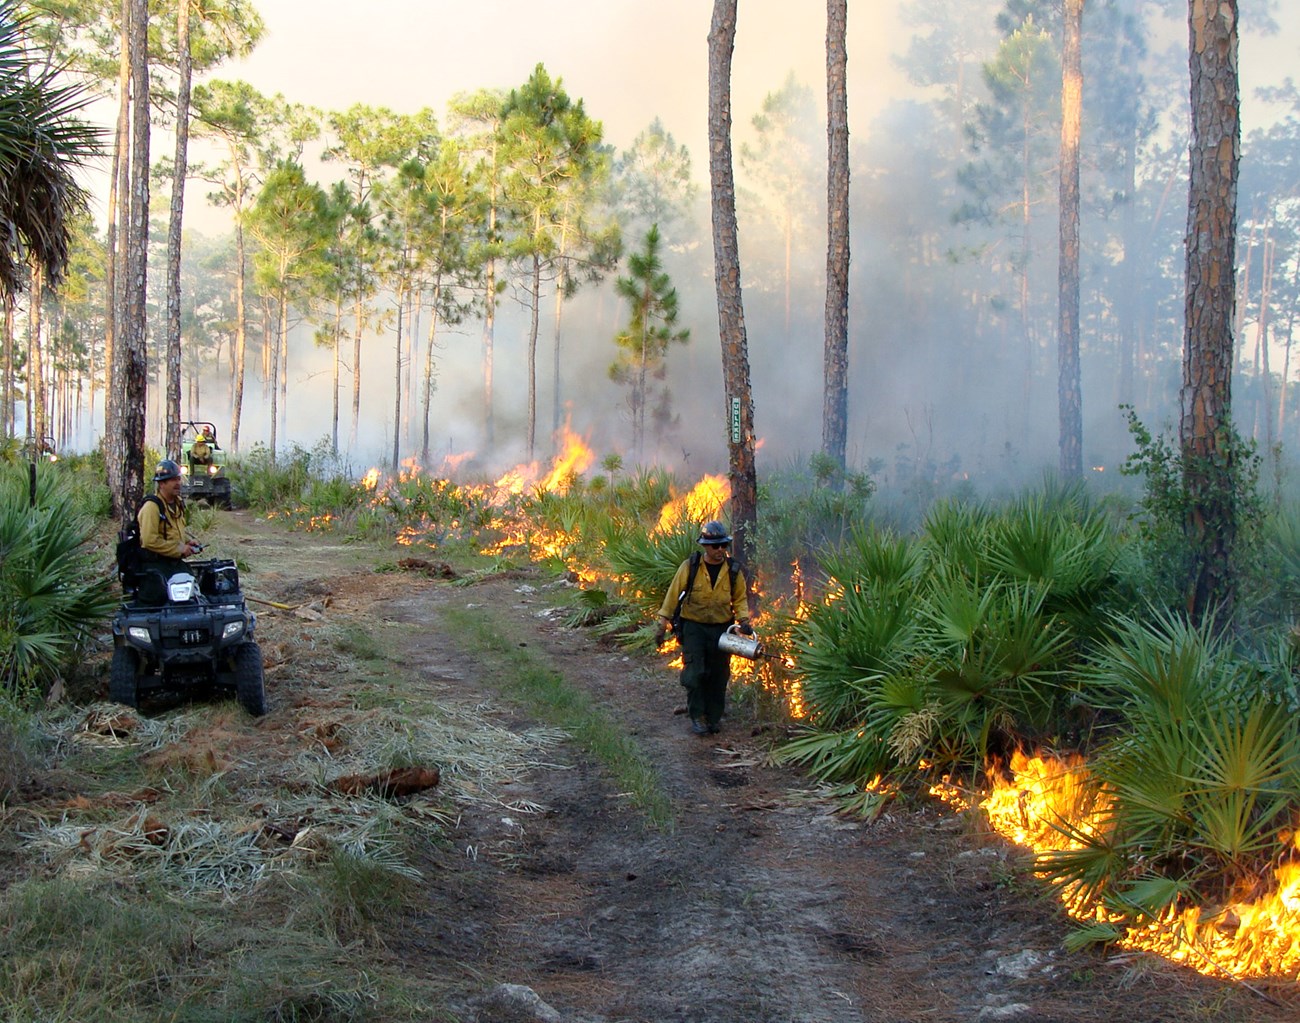 Firefighters maintaining a fireline